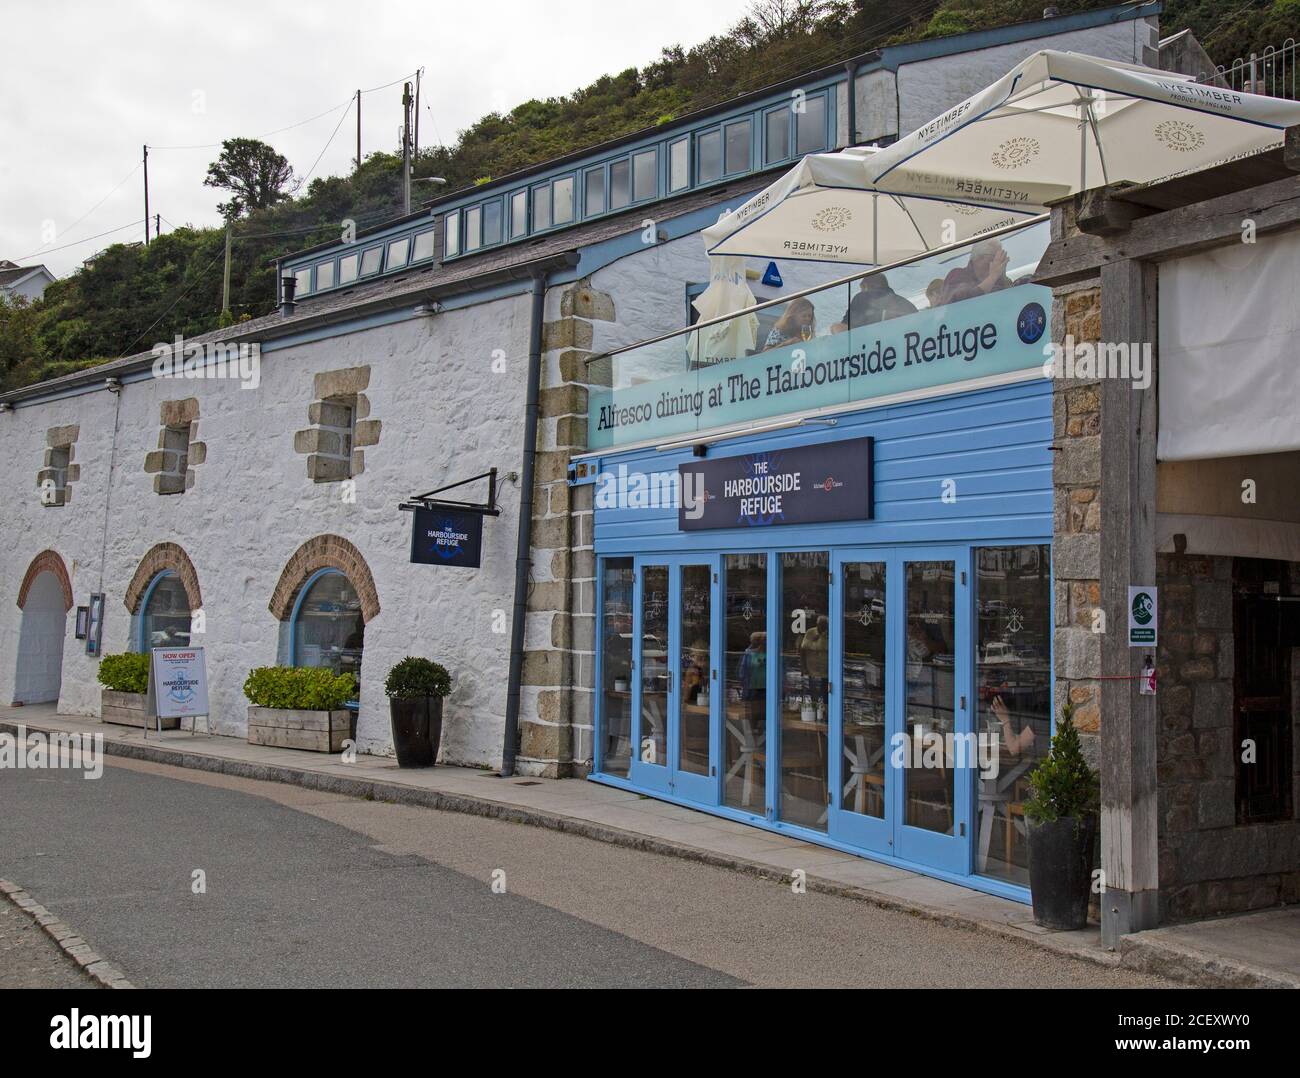 The Harbourside Refuge Restaurant and Bar in Porthleven Cornwall, England, opened by chef Michael Caine in August 2020. Stock Photo